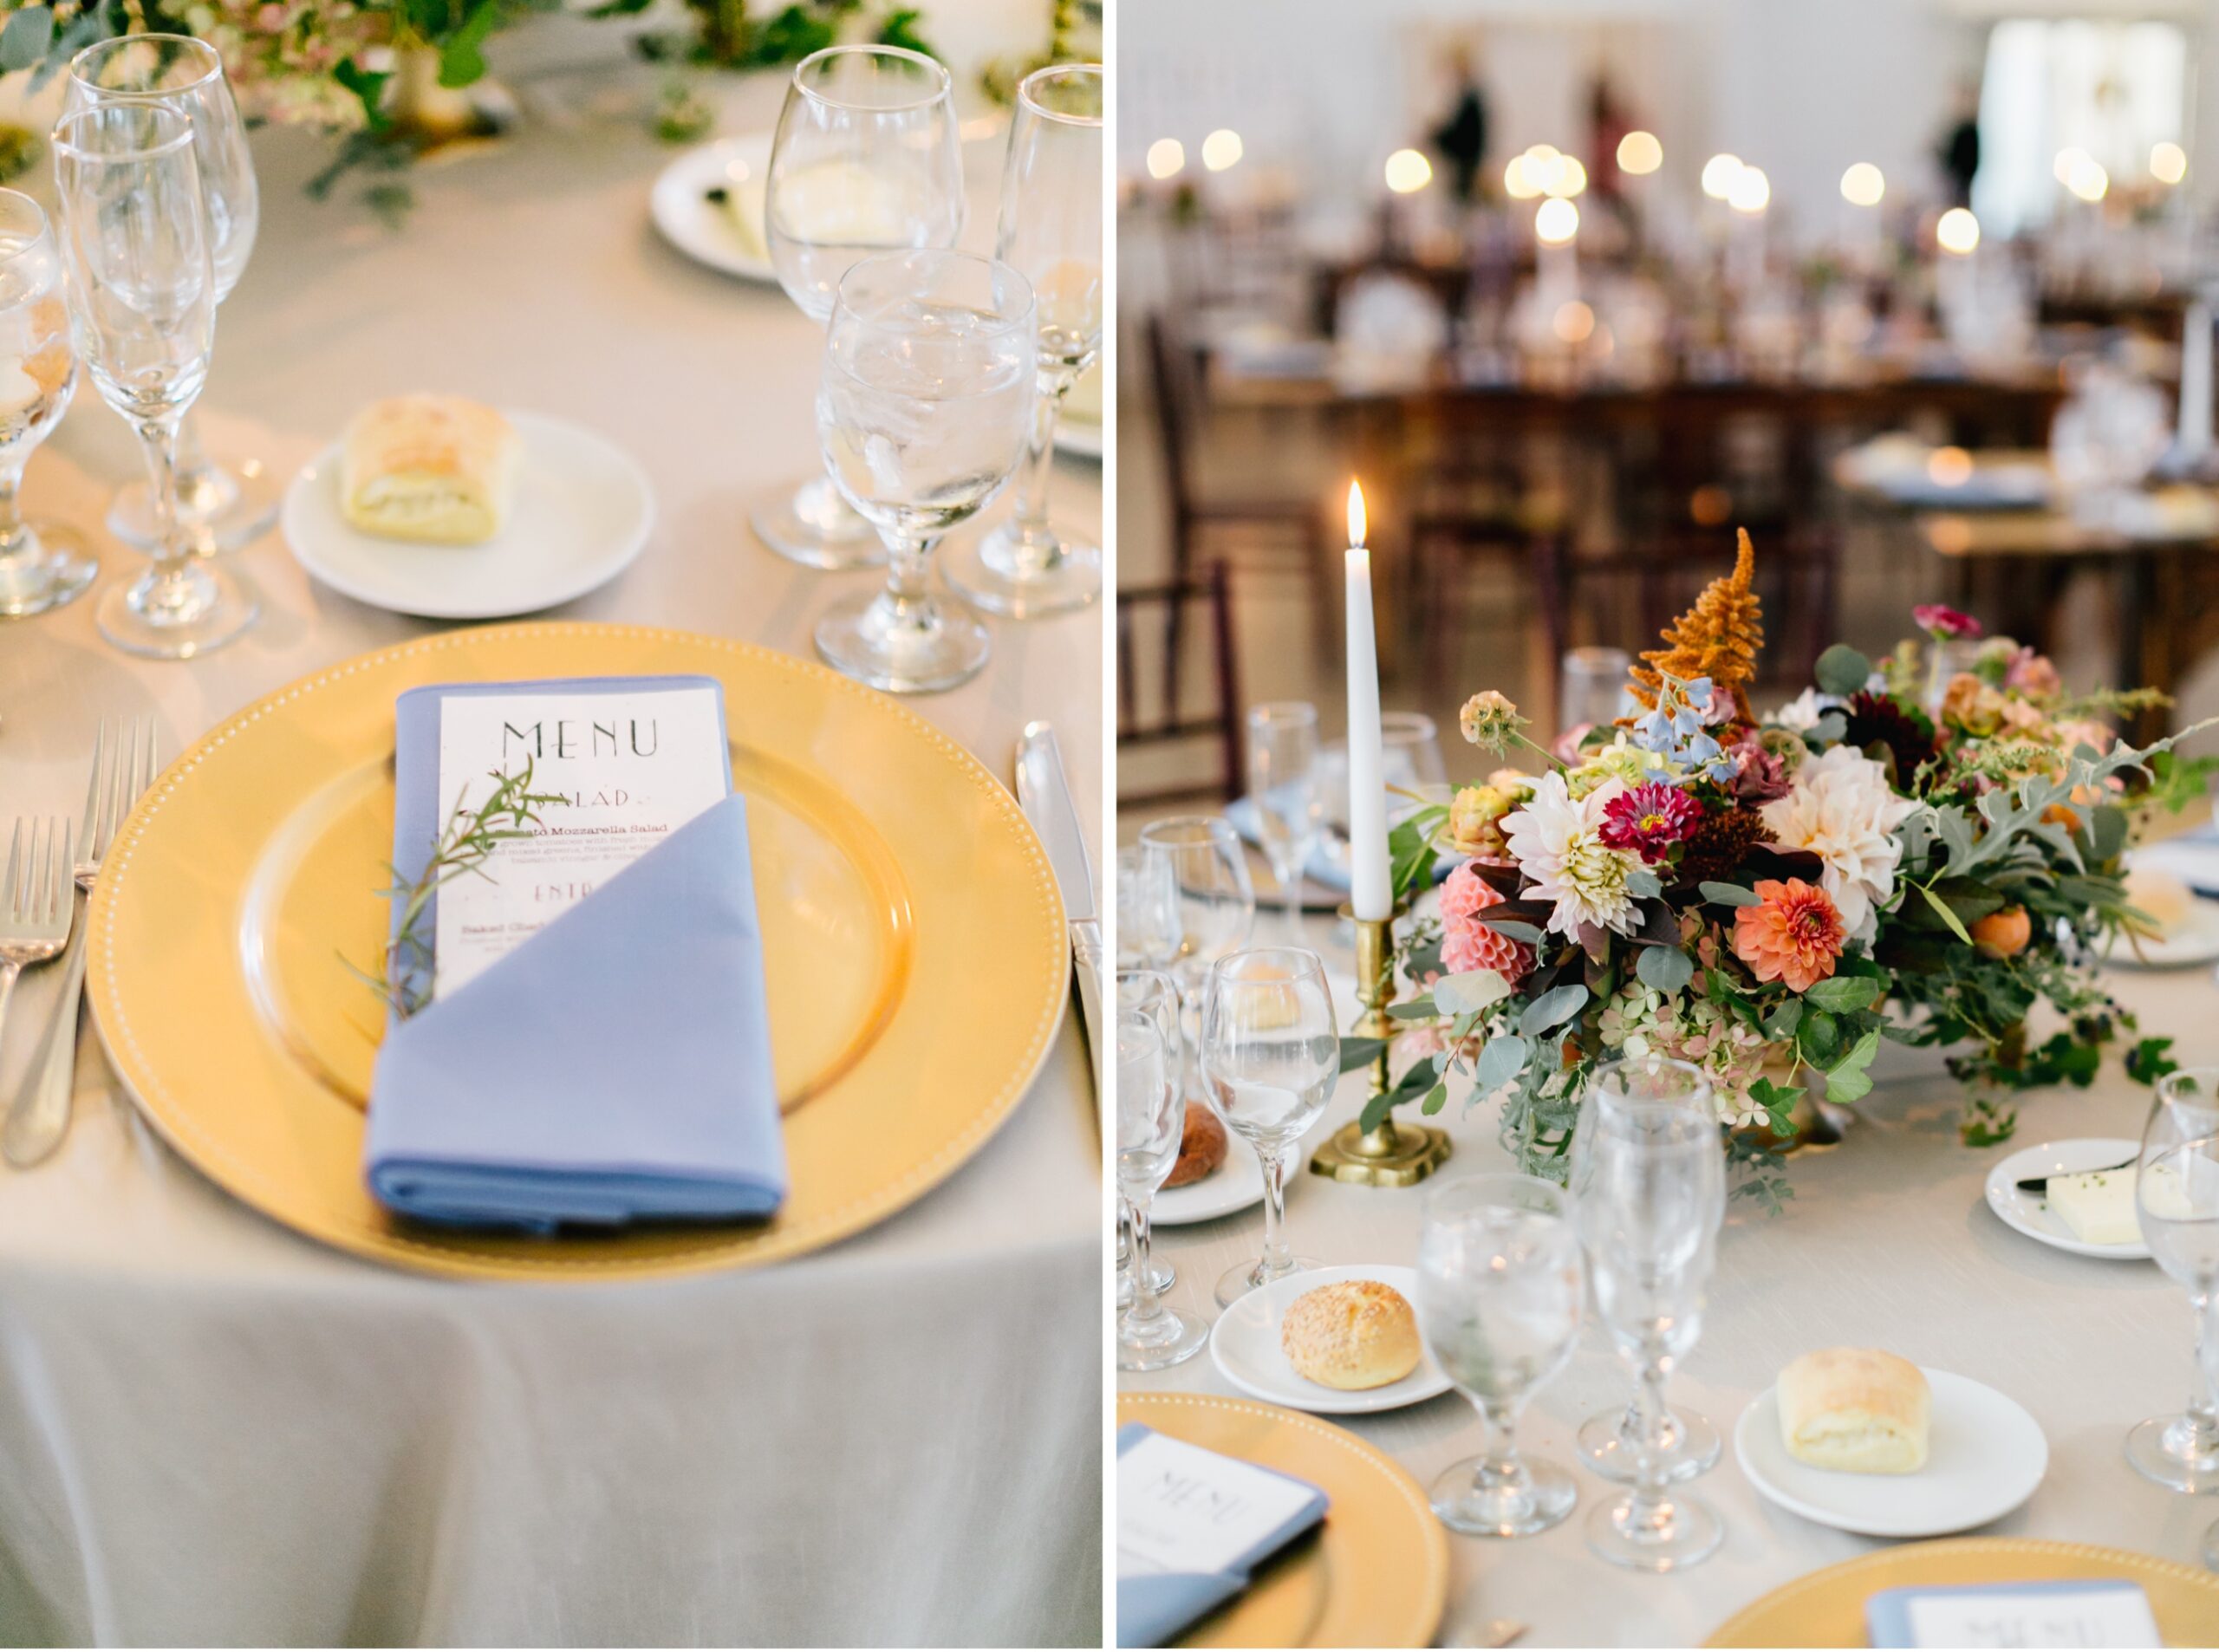 Eclectic table decor at a whimsical wedding reception